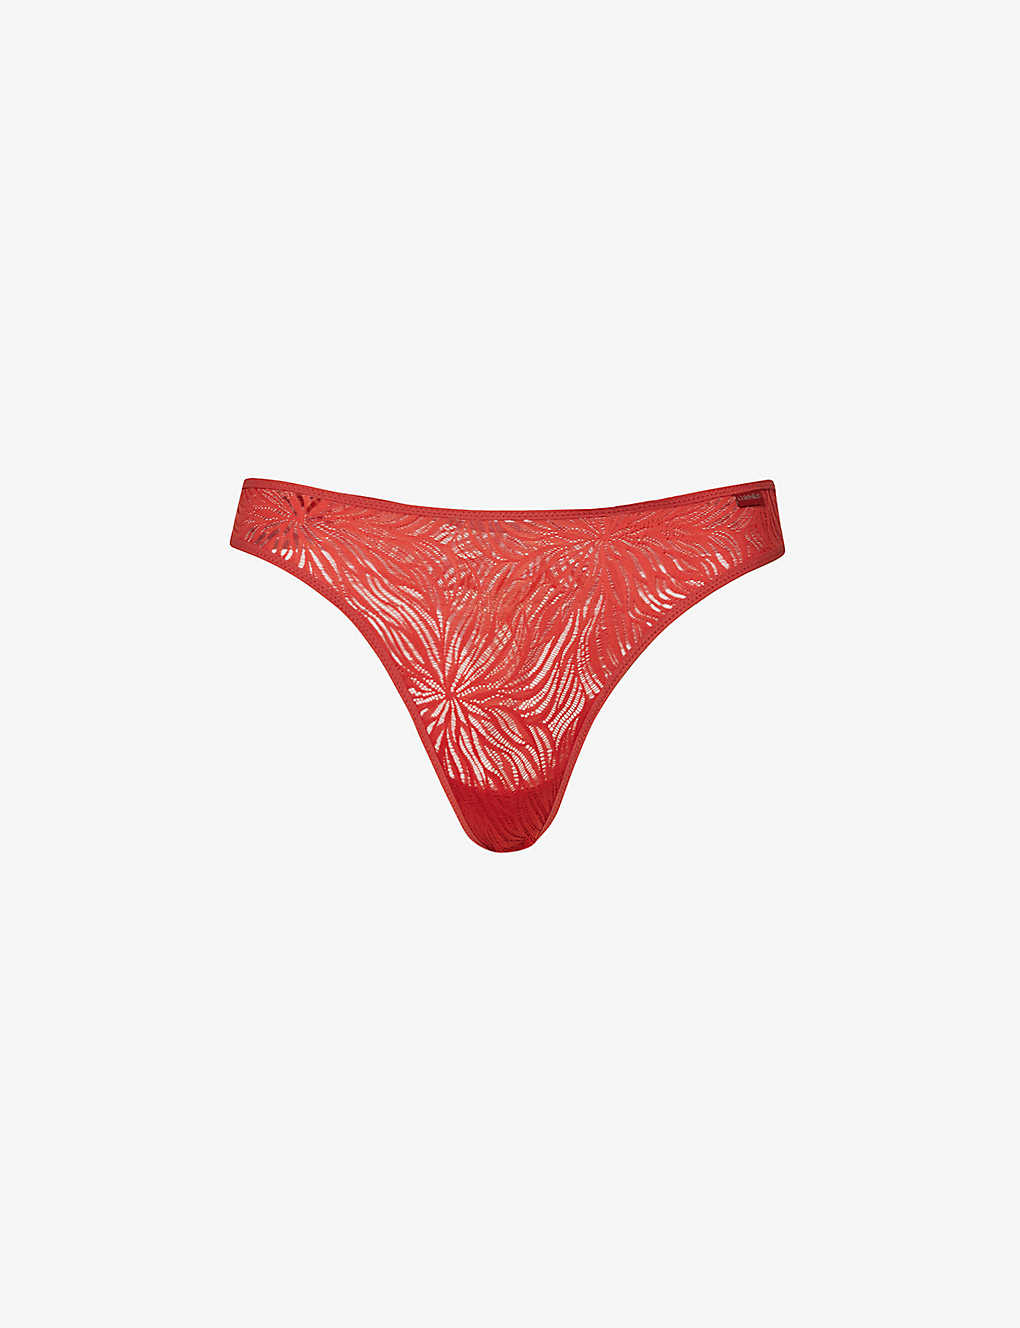 Calvin Klein Womens Jazzberry Jam Sheer Marquisette Floral-pattern Mid-rise Stretch-lace Thong